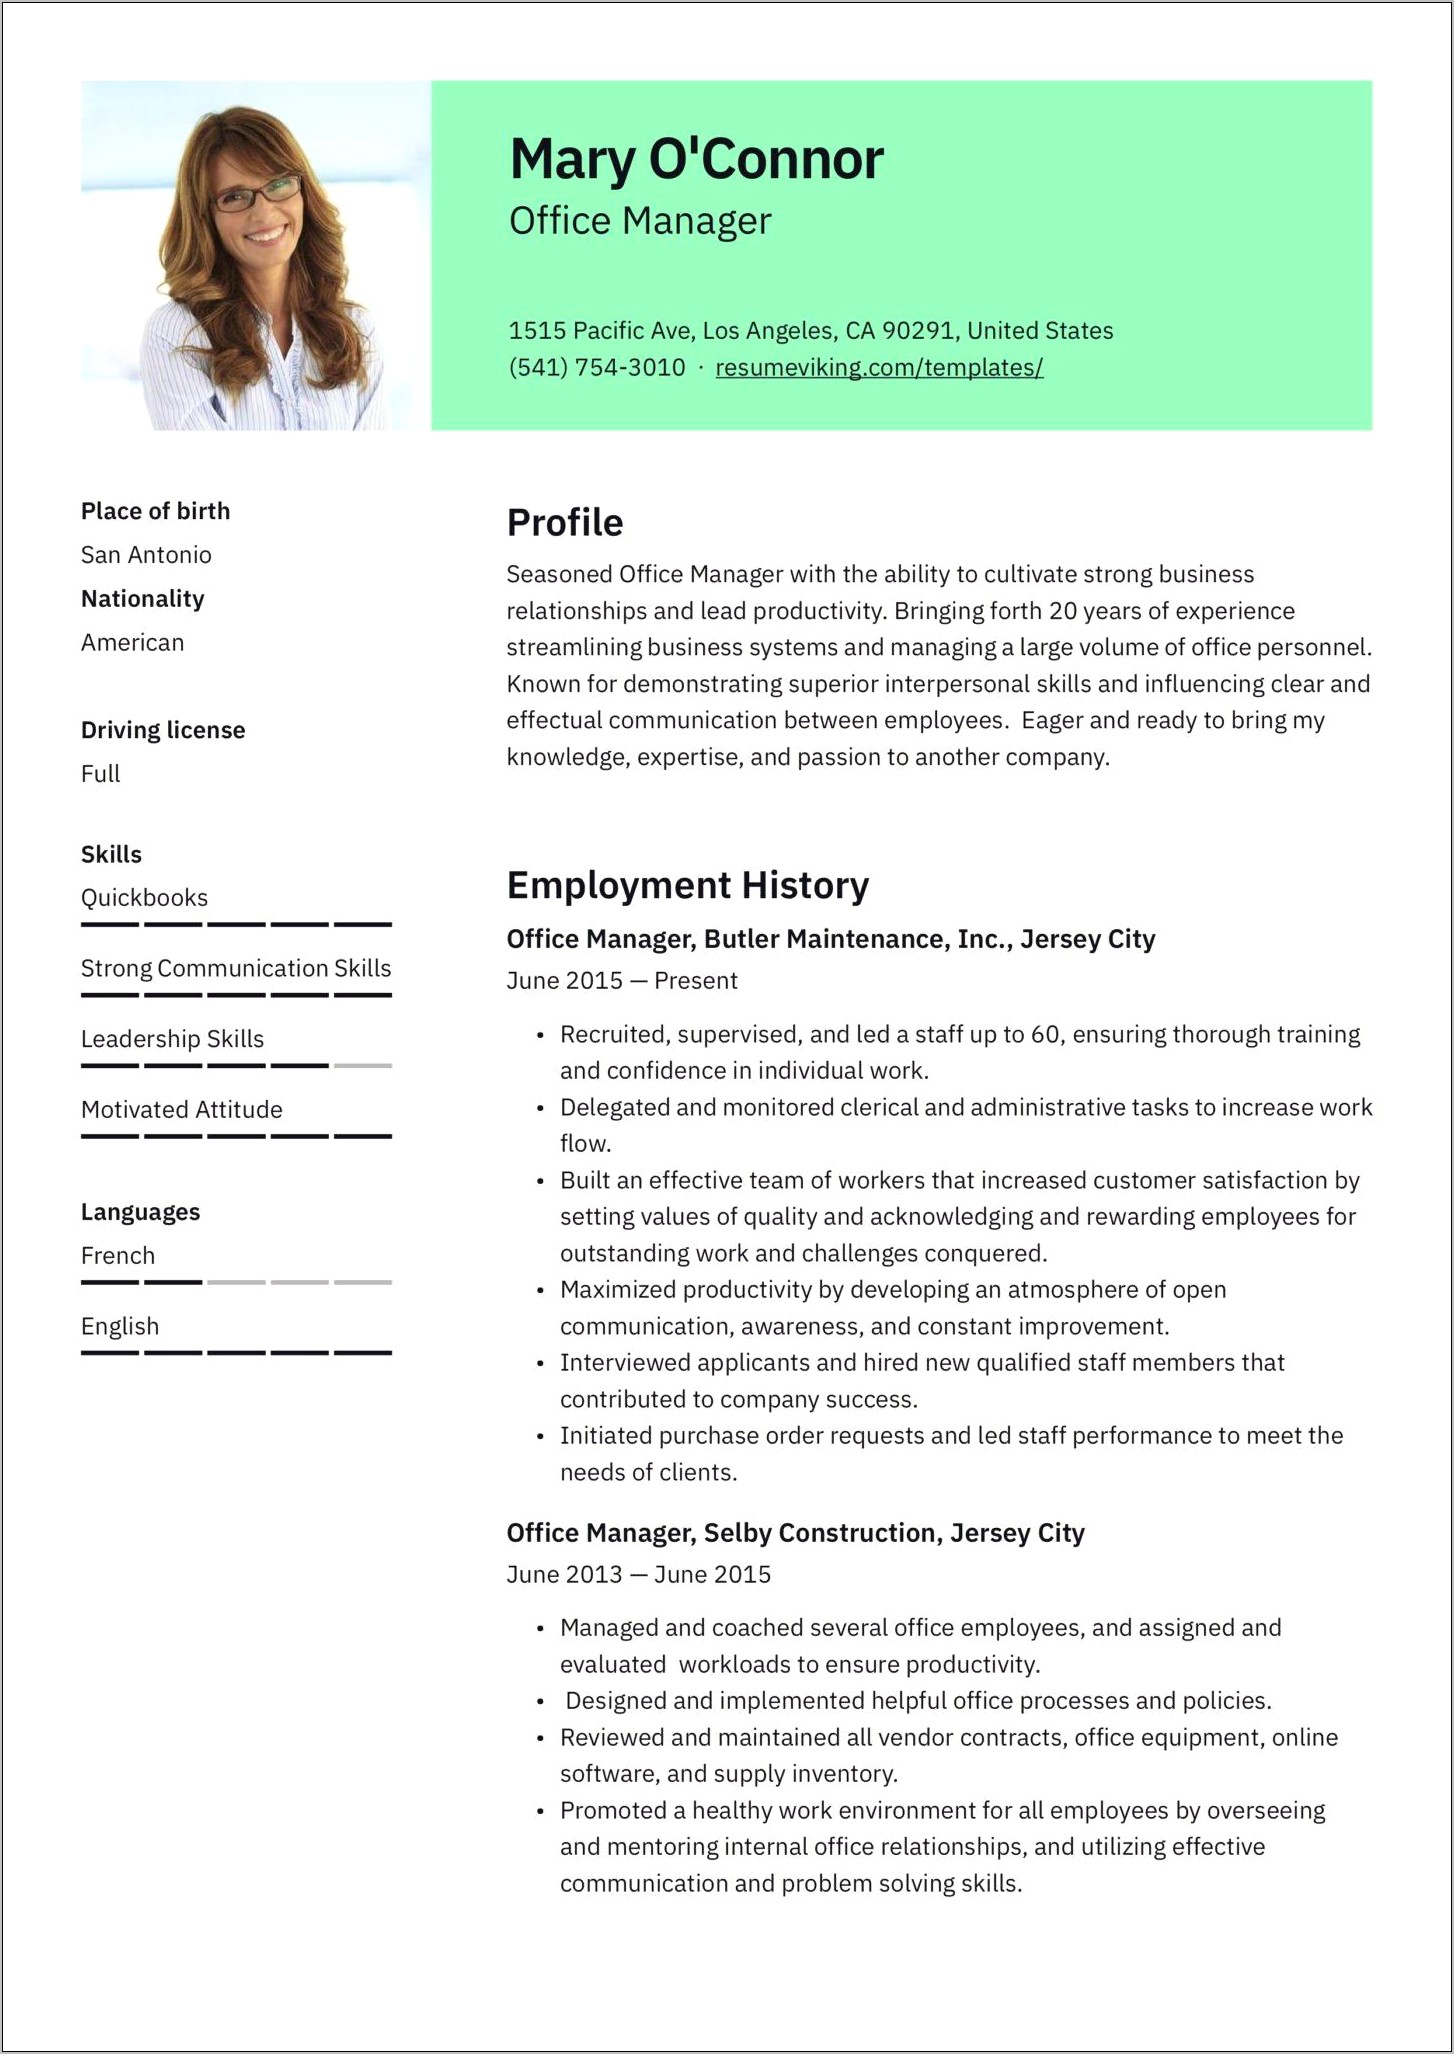 Office Manager Resume Summary Sample